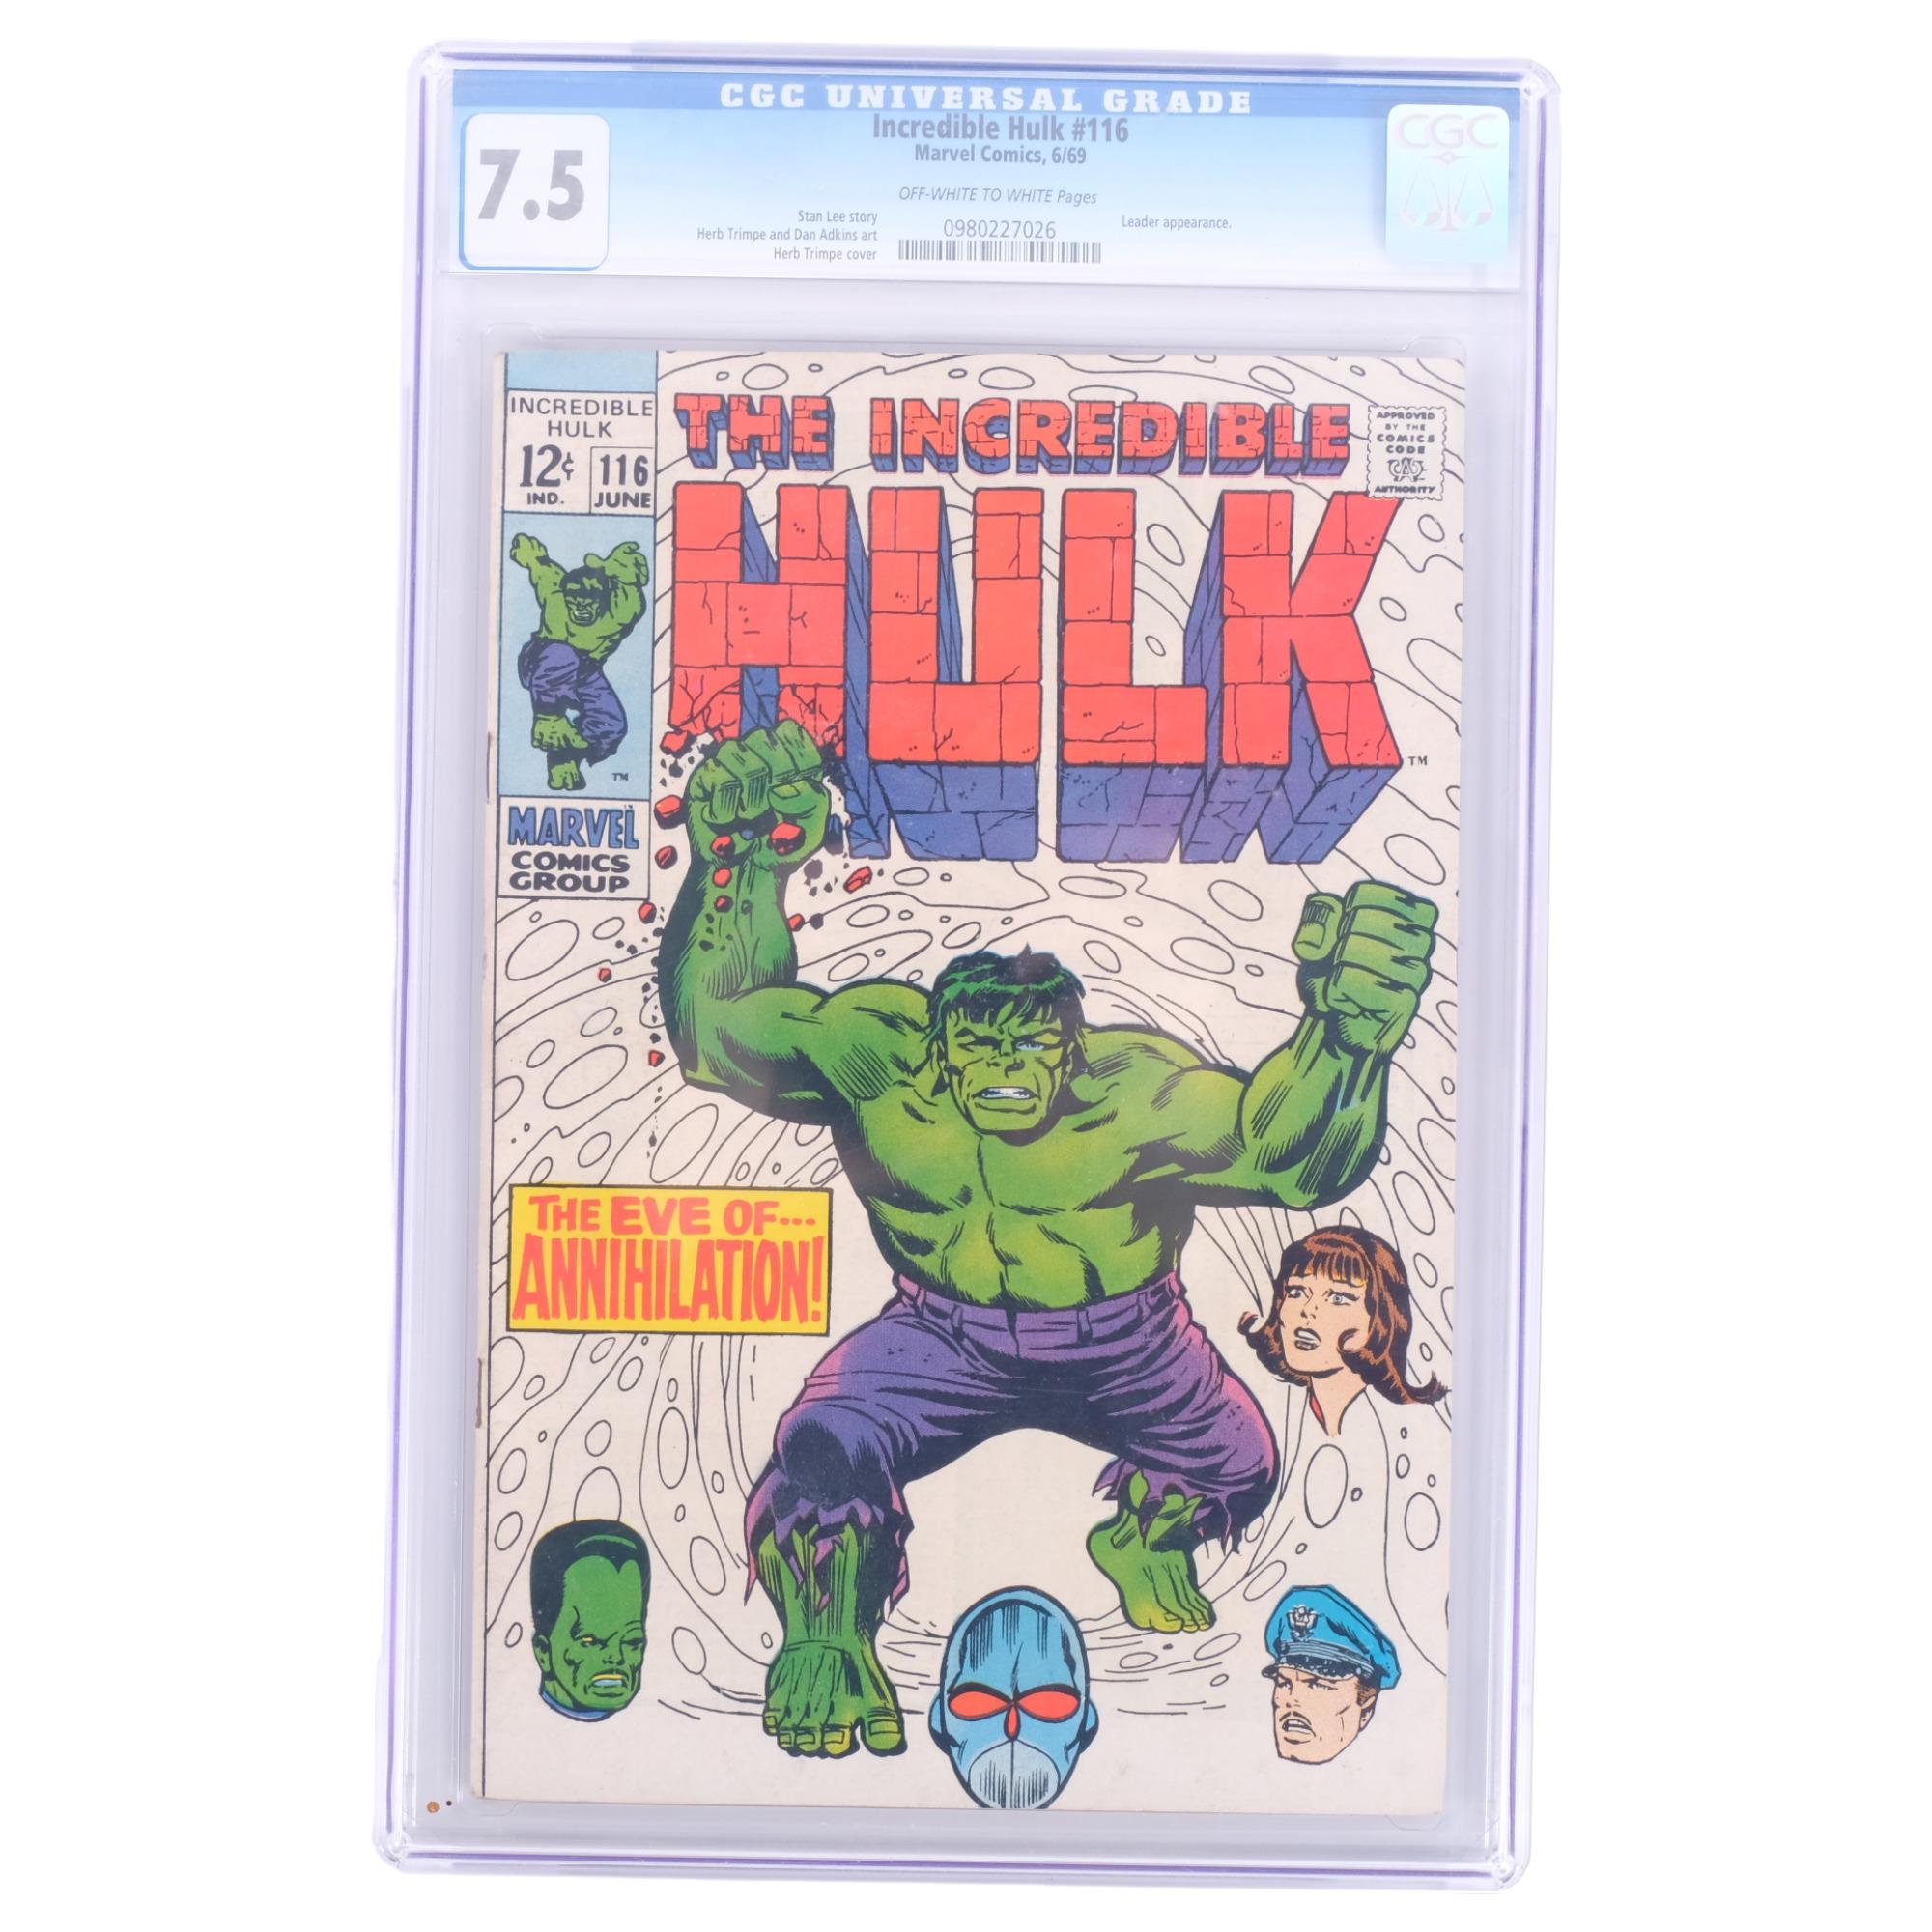 MARVEL COMICS GROUP - The Incredible Hulk no. 116, "The Eve Of Annihilation!", CGC graded 7.5, and